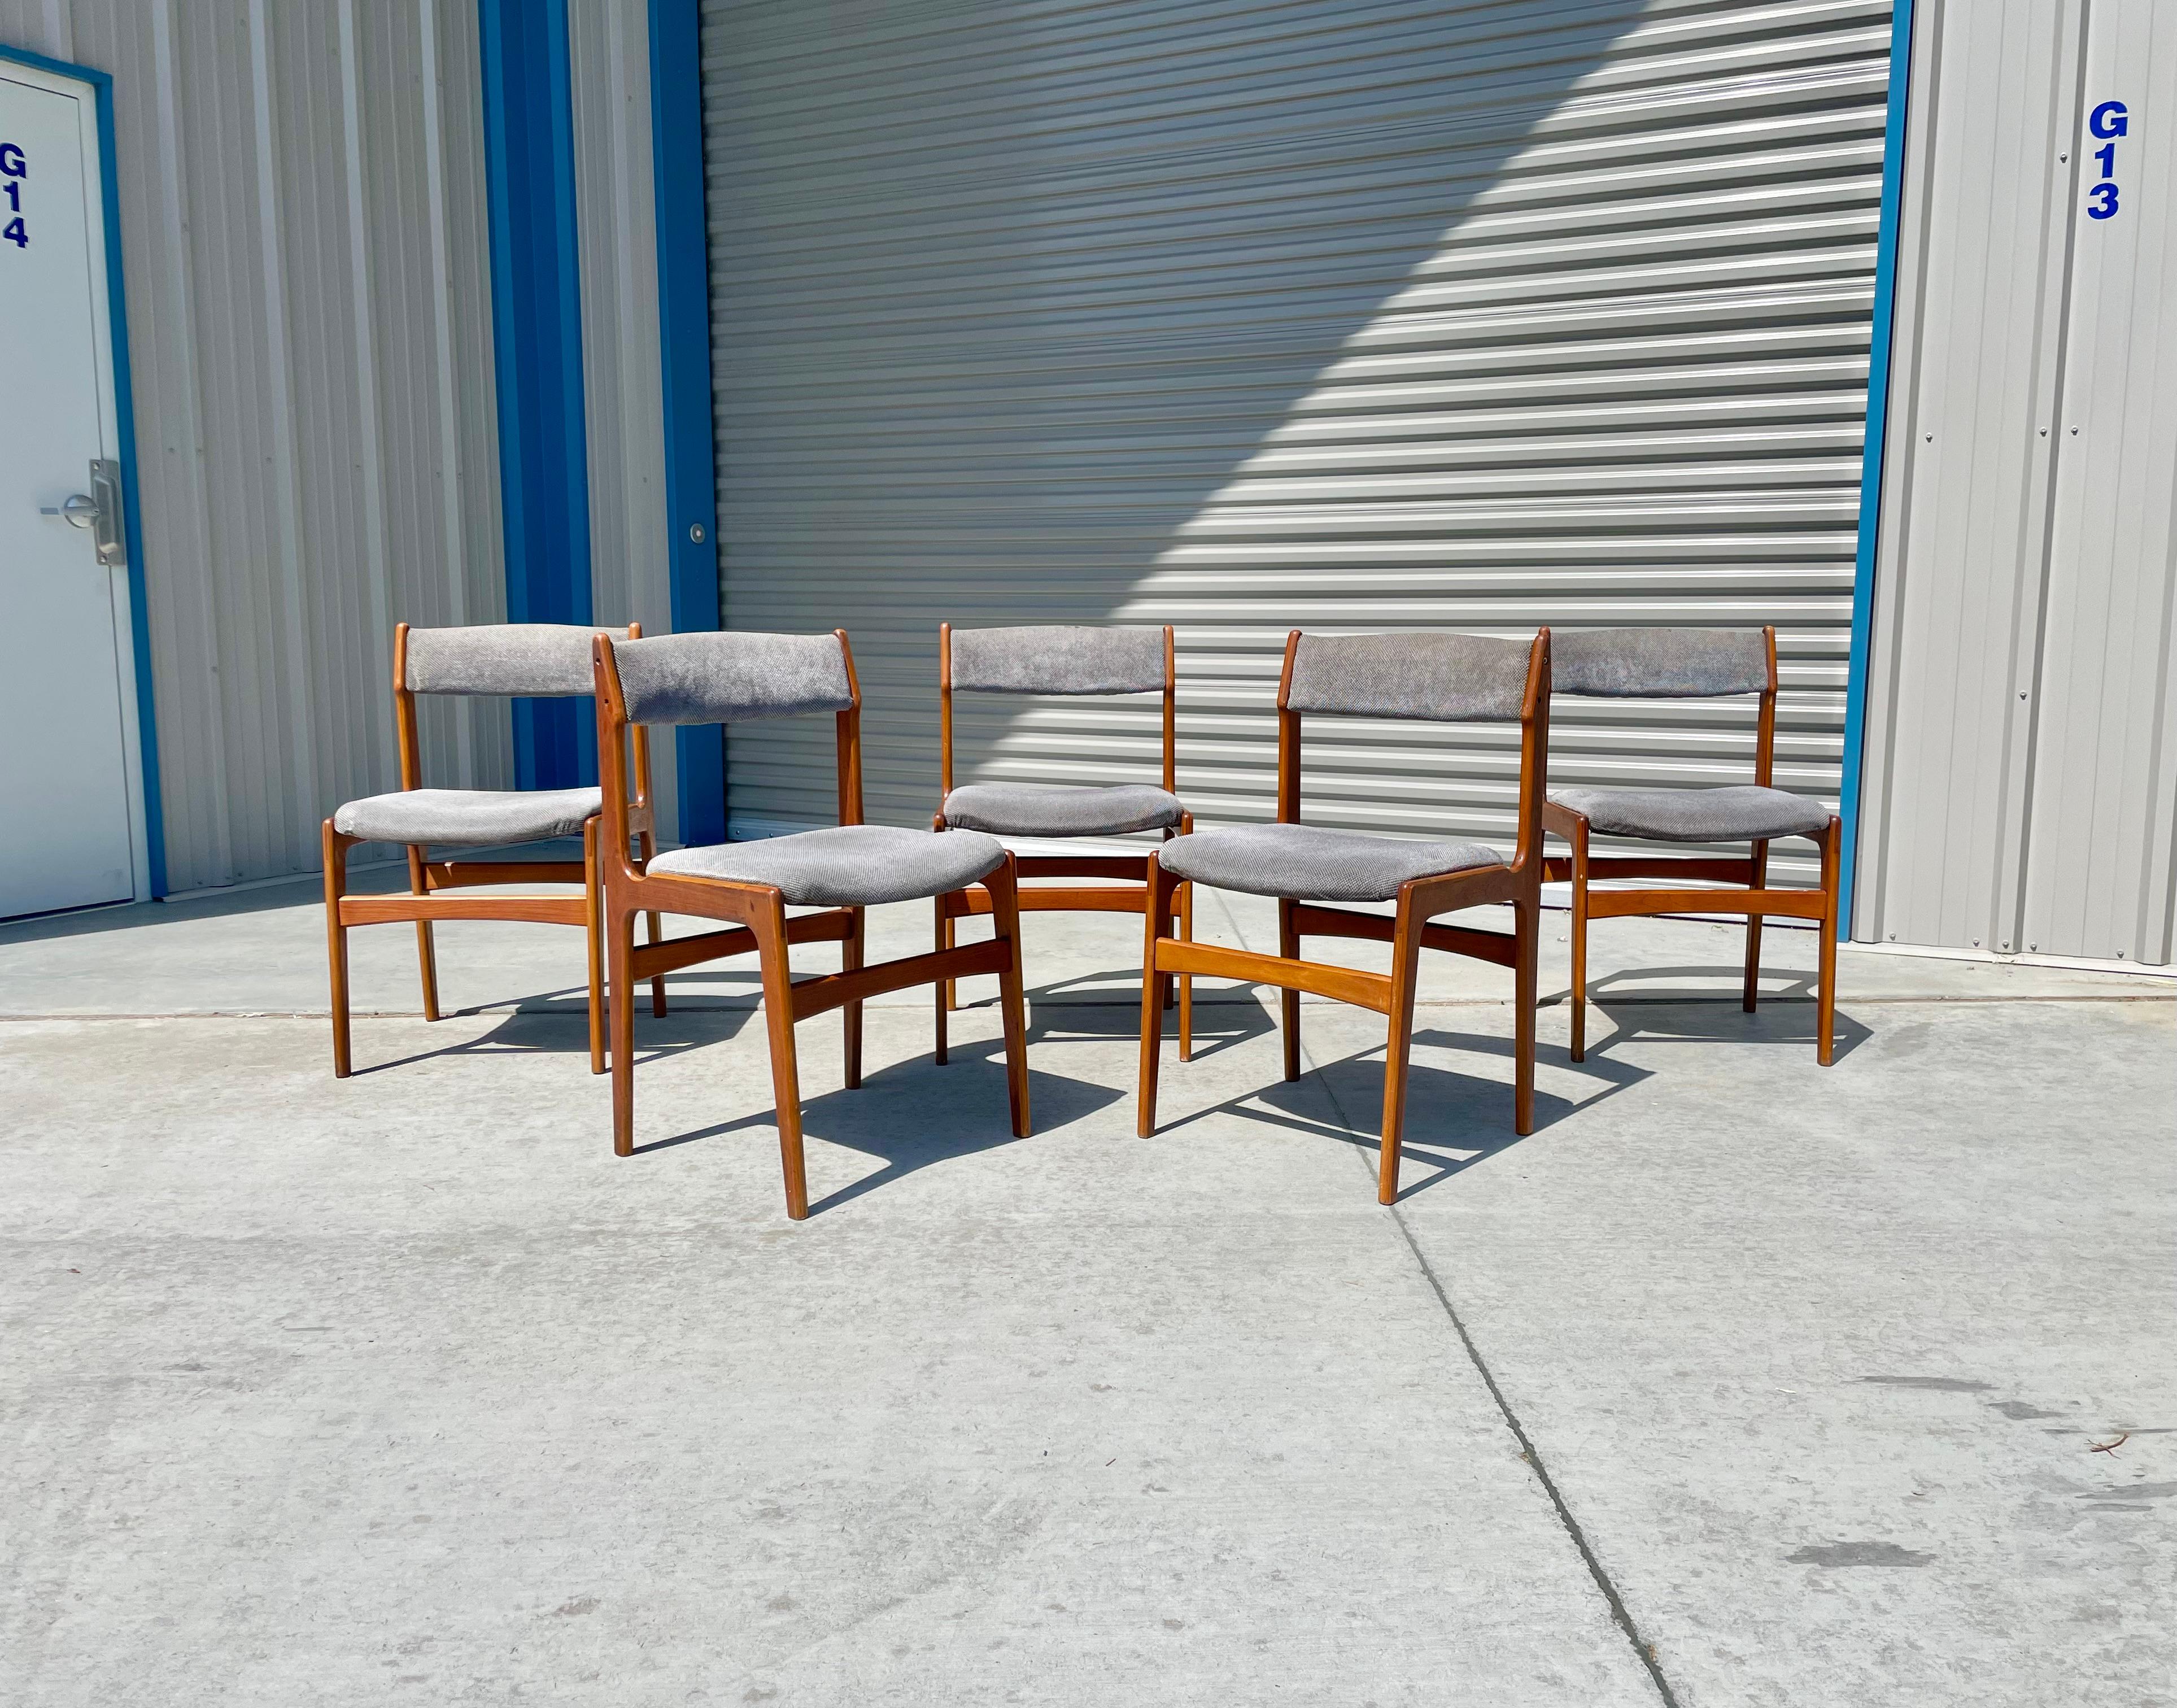 1960s Danish Modern Teak Dining Chairs - Set of 6 In Good Condition For Sale In North Hollywood, CA